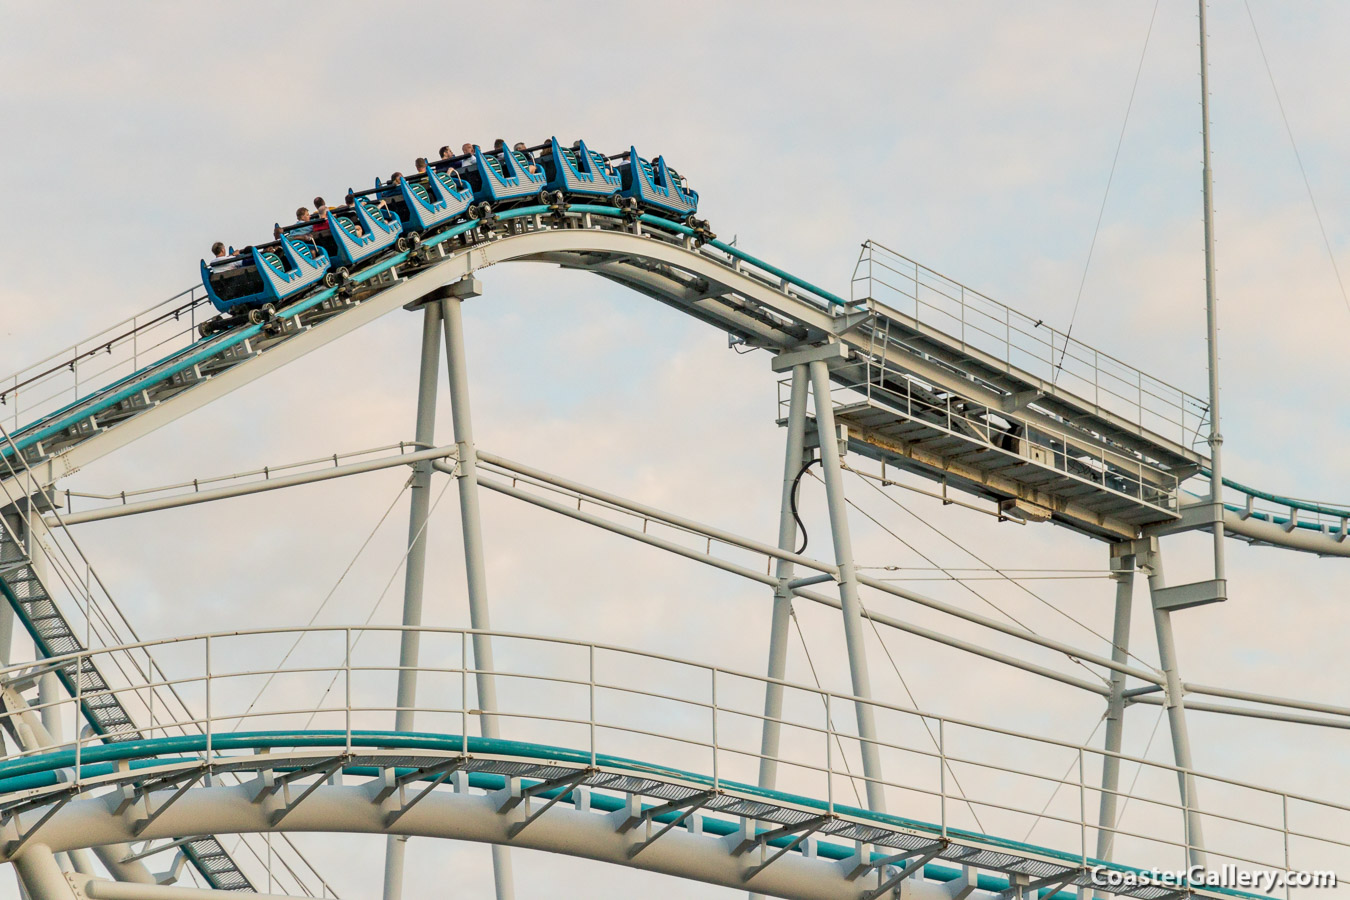 Lift hill on the Surf Coaster Leviathan roller coaster in Tokyo, Japan